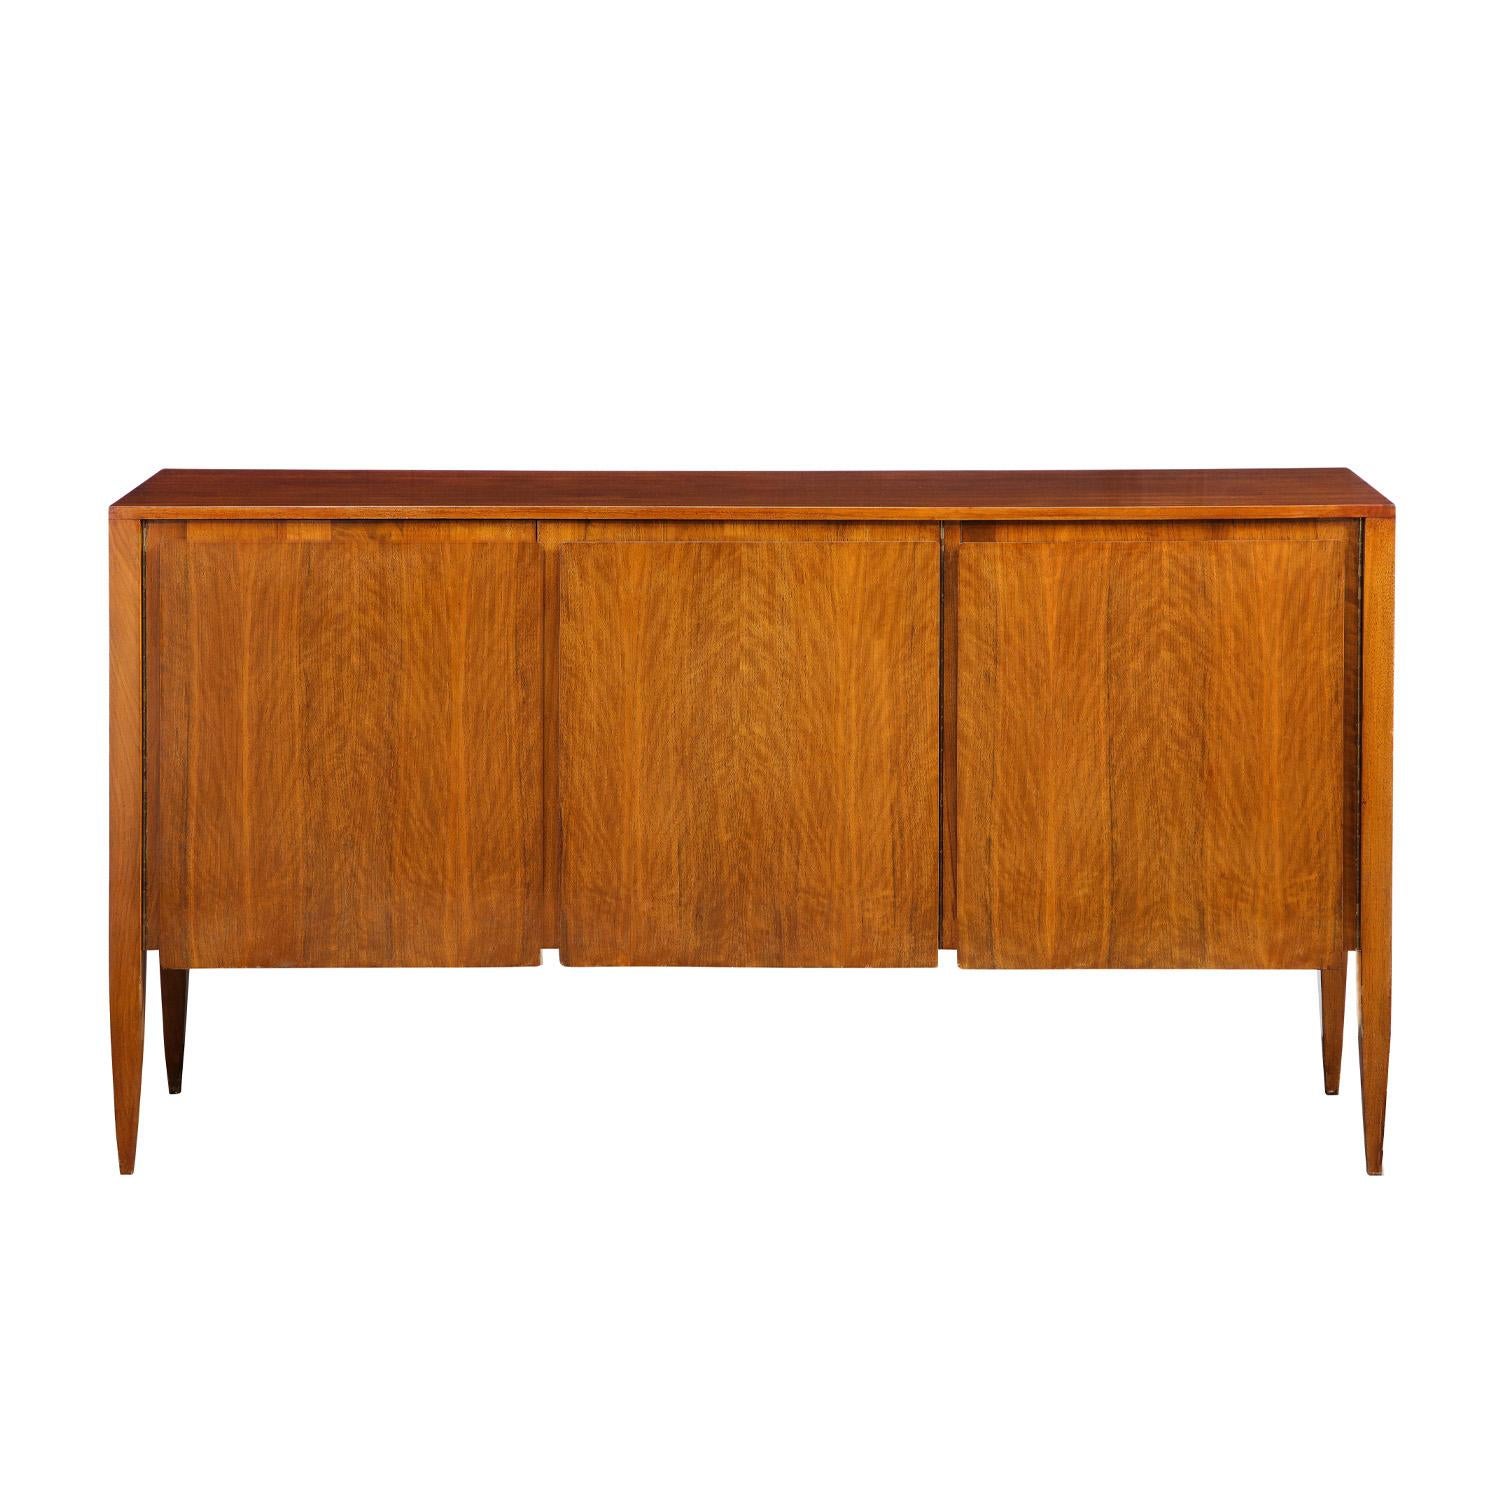 3 Door credenza model 2160 in walnut with raised panels on doors and tapering legs by Gio Ponti for M.Singer & Sons, American 1950's. The interior is beautifully outfitted.

Reference:
M. Singer & Sons catalog published ca 1950